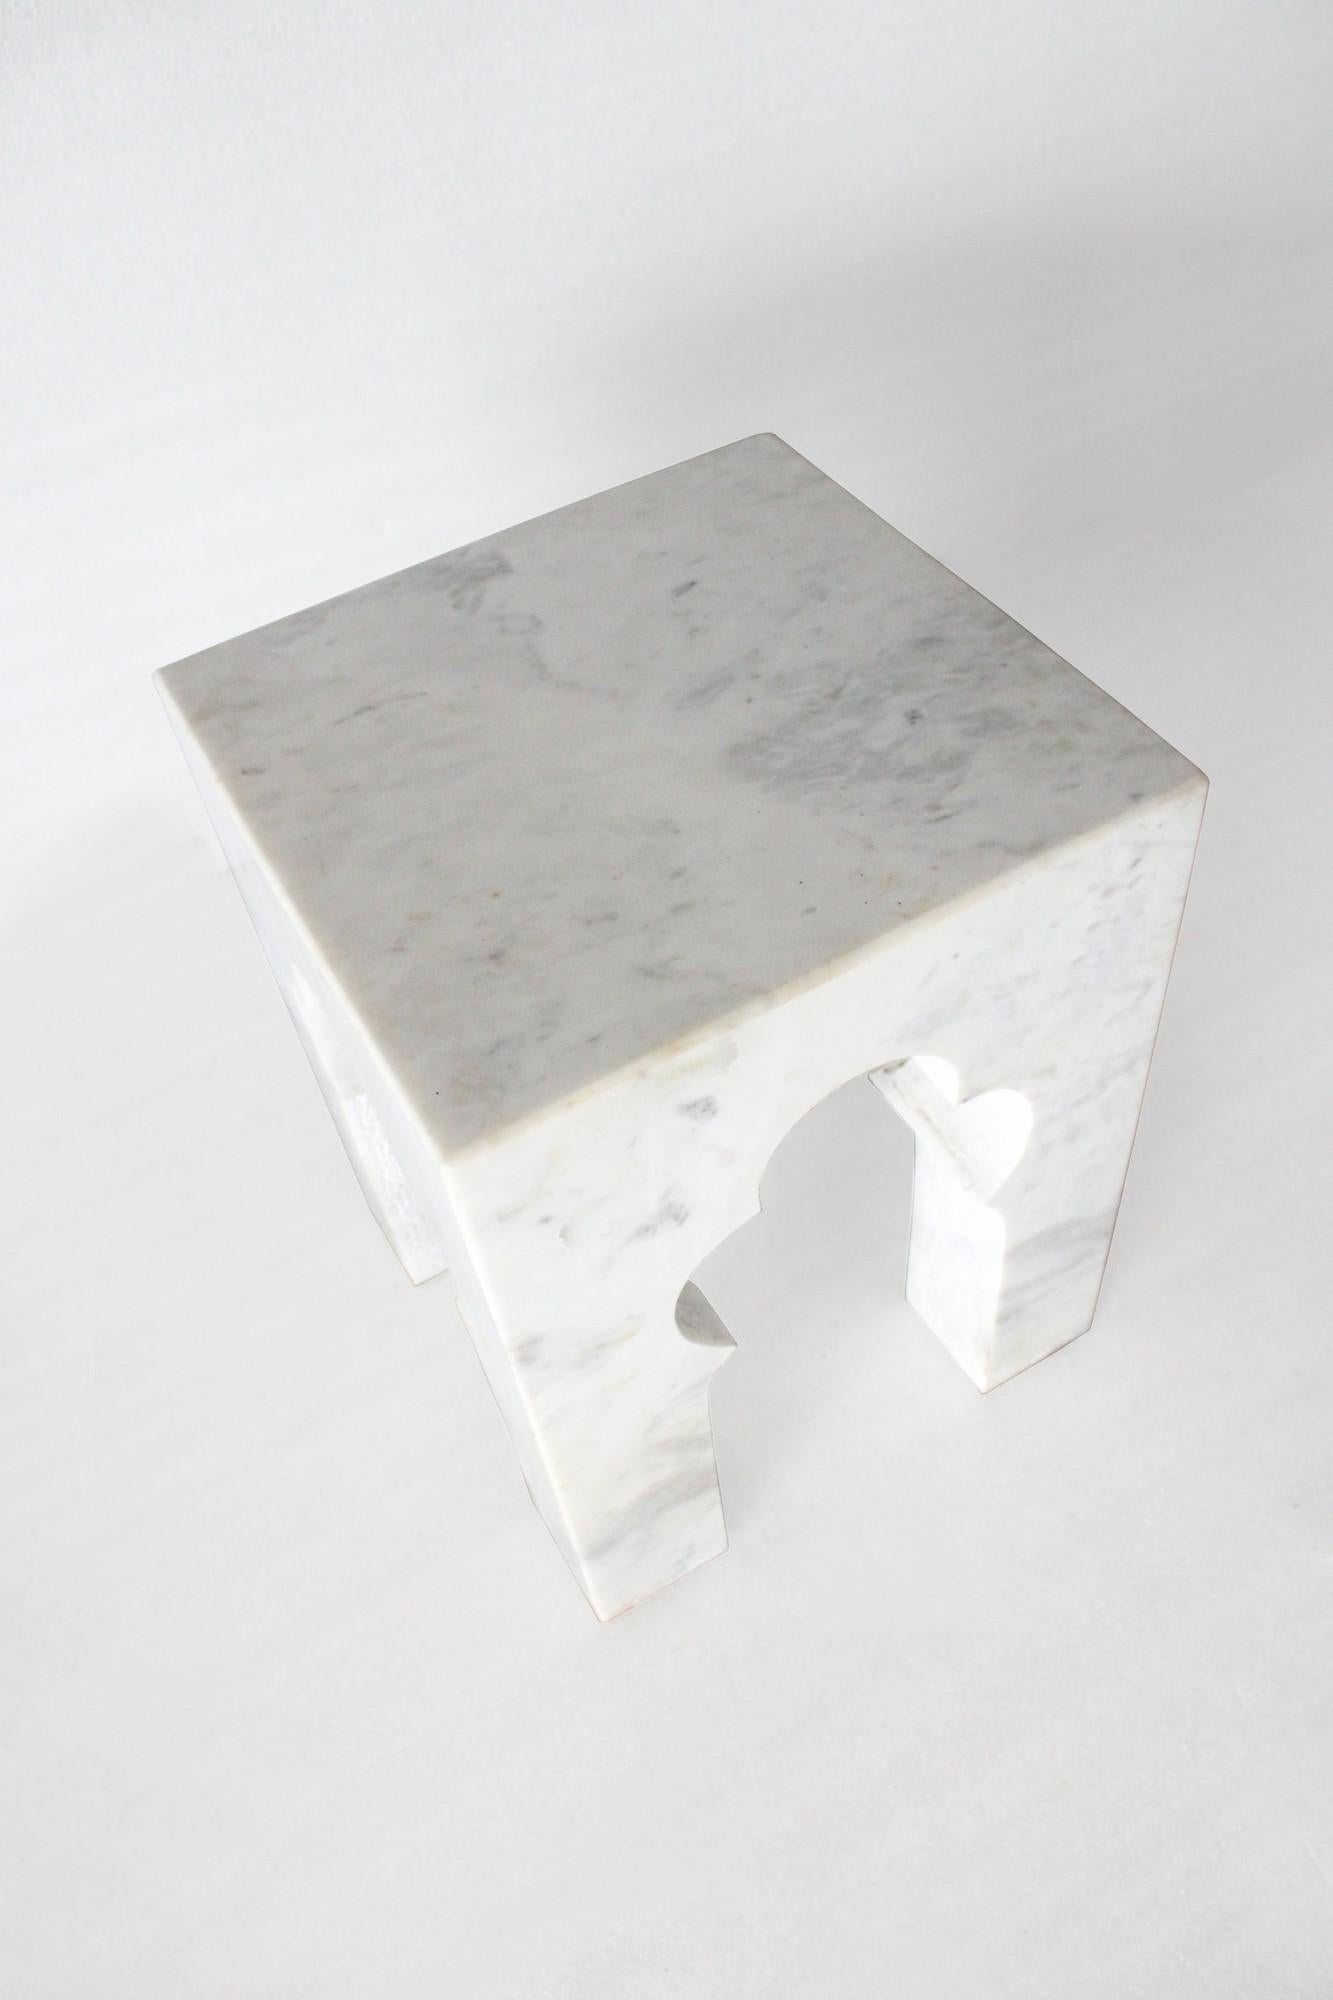 Inspired by the elegant architectural element, namely the mehrabs, he saw in the palaces of Mughal India, the renowned designer Paul Mathieu has created this unique hand-carved side table. Solid blocks of marble are hand-carved into low elegant